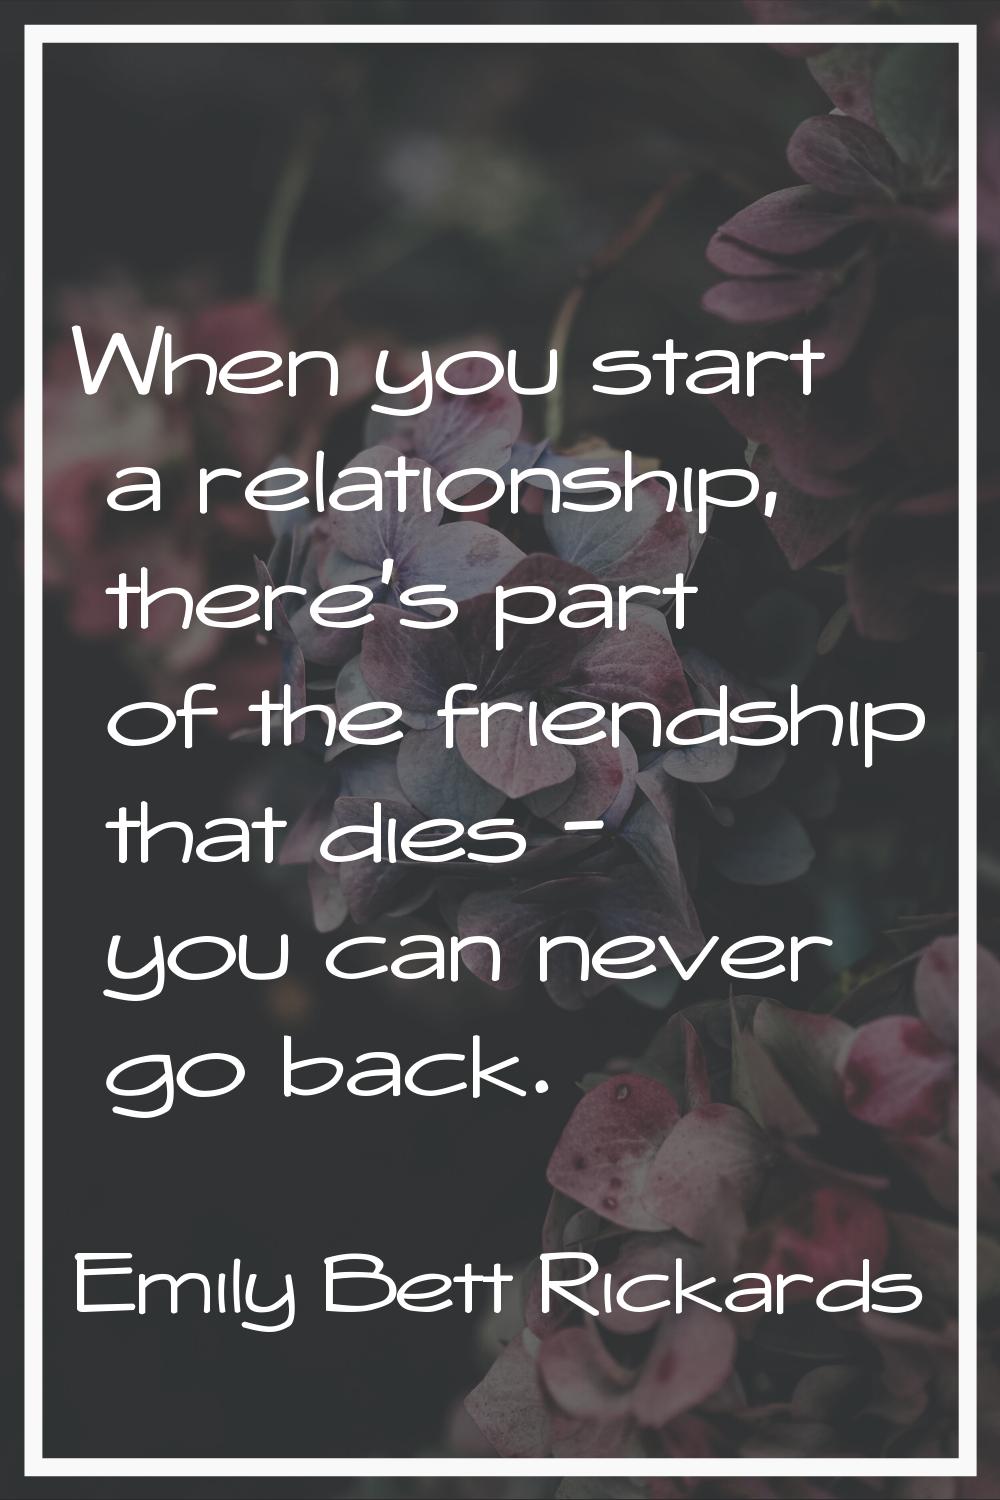 When you start a relationship, there's part of the friendship that dies - you can never go back.